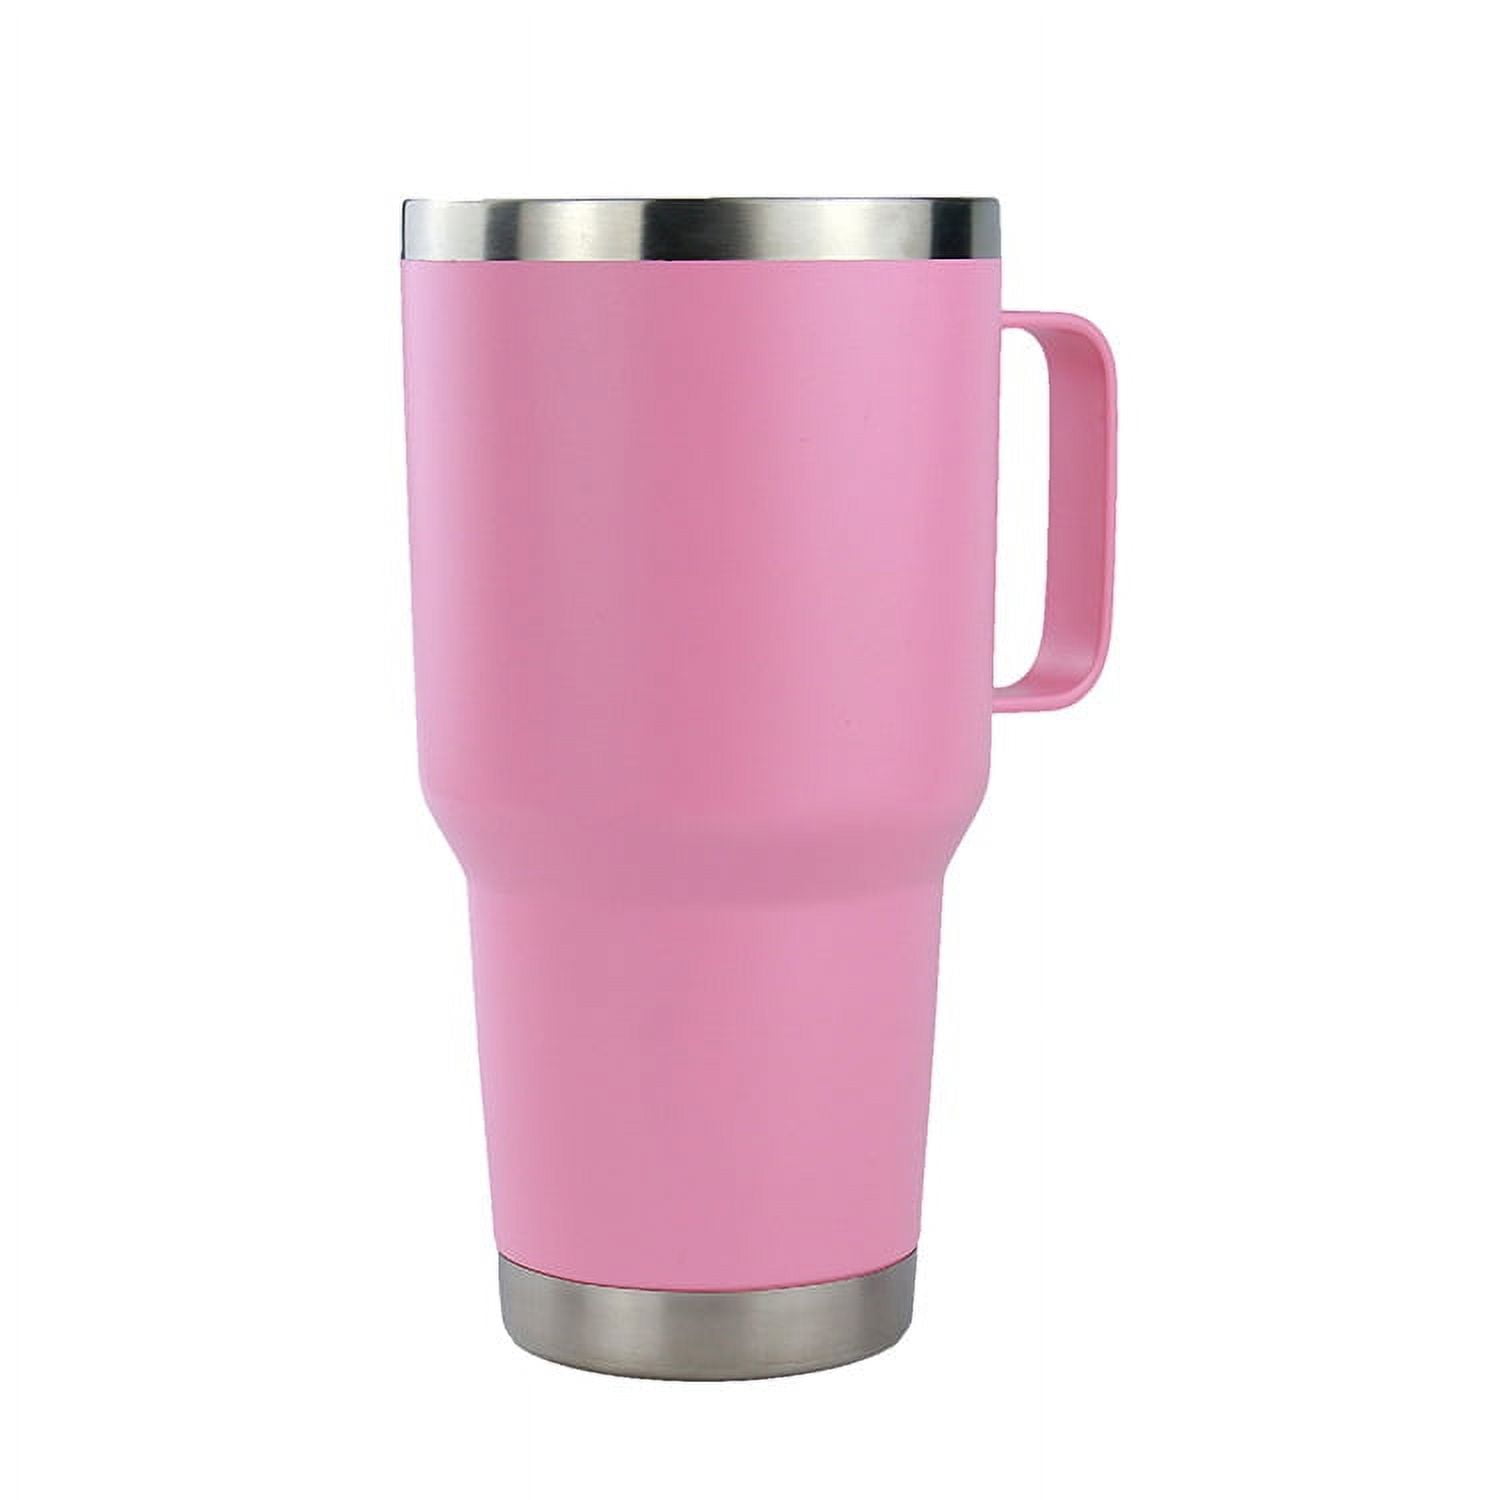 Large Travel Coffee Mug Tumbler with Clear Slide Lid & Handle, Reusable  Vacuum Insulated Double Wall Stainless Steel Thermos, Fits in Cup Holder,  30oz (Pink) 